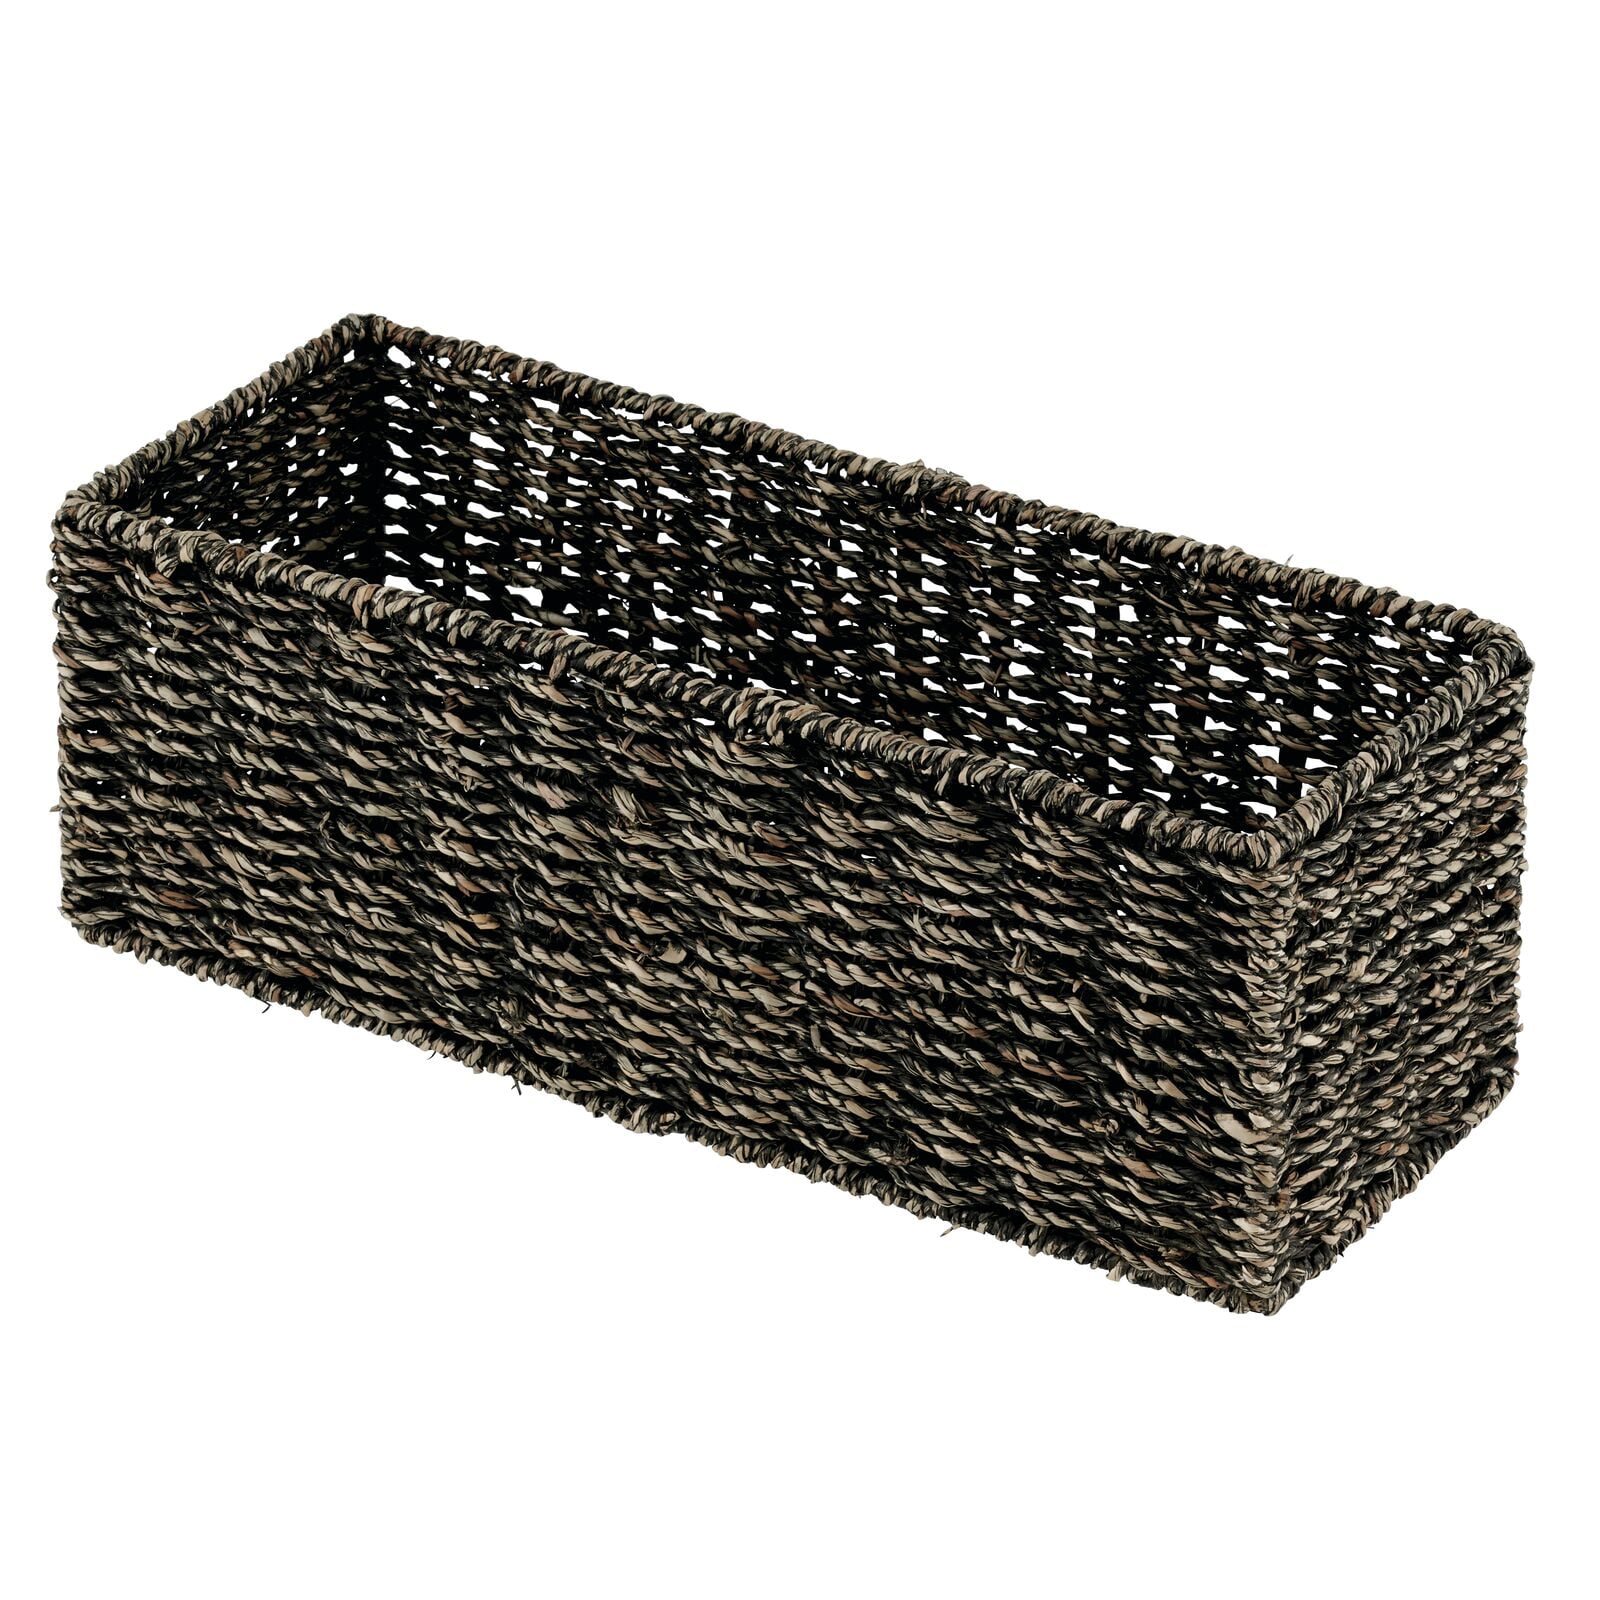 Gray mDesign Natural Woven Water Hyacinth Bathroom Toliet Roll Holder Storage Organizer Basket Bin; Use in Bathroom Holds 3 Rolls of Toilet Paper Toilet Tanks